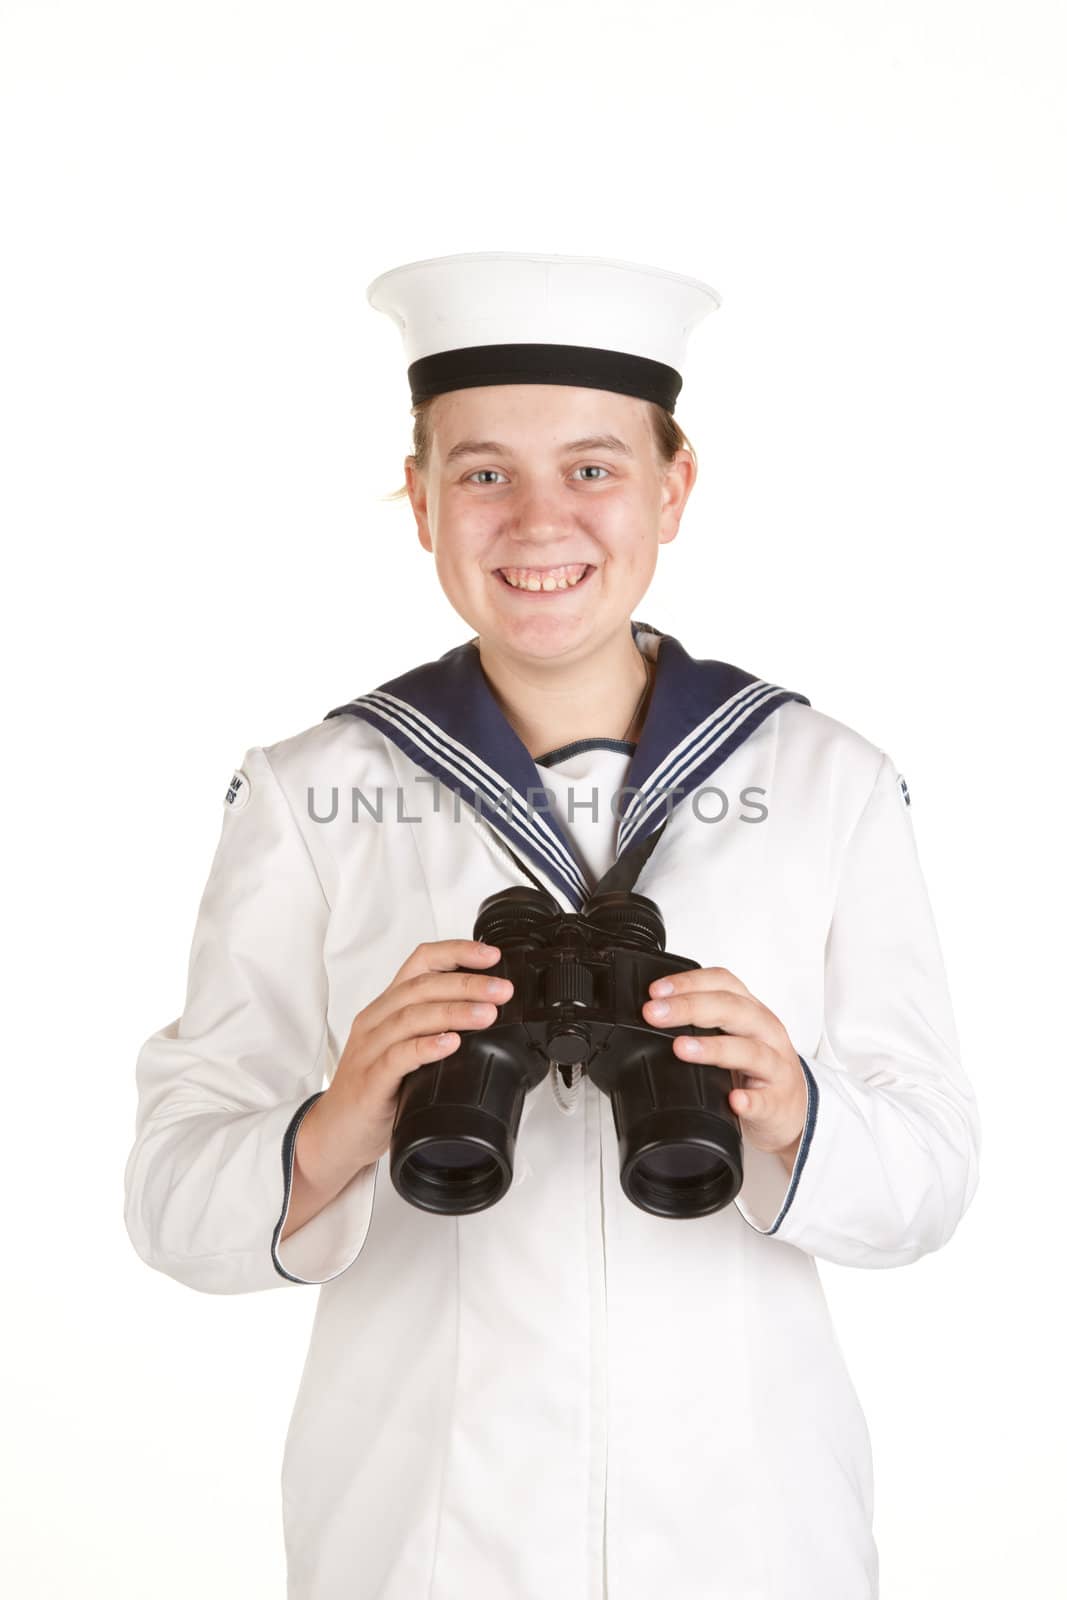 young sailor with binoculars isolated white background by clearviewstock